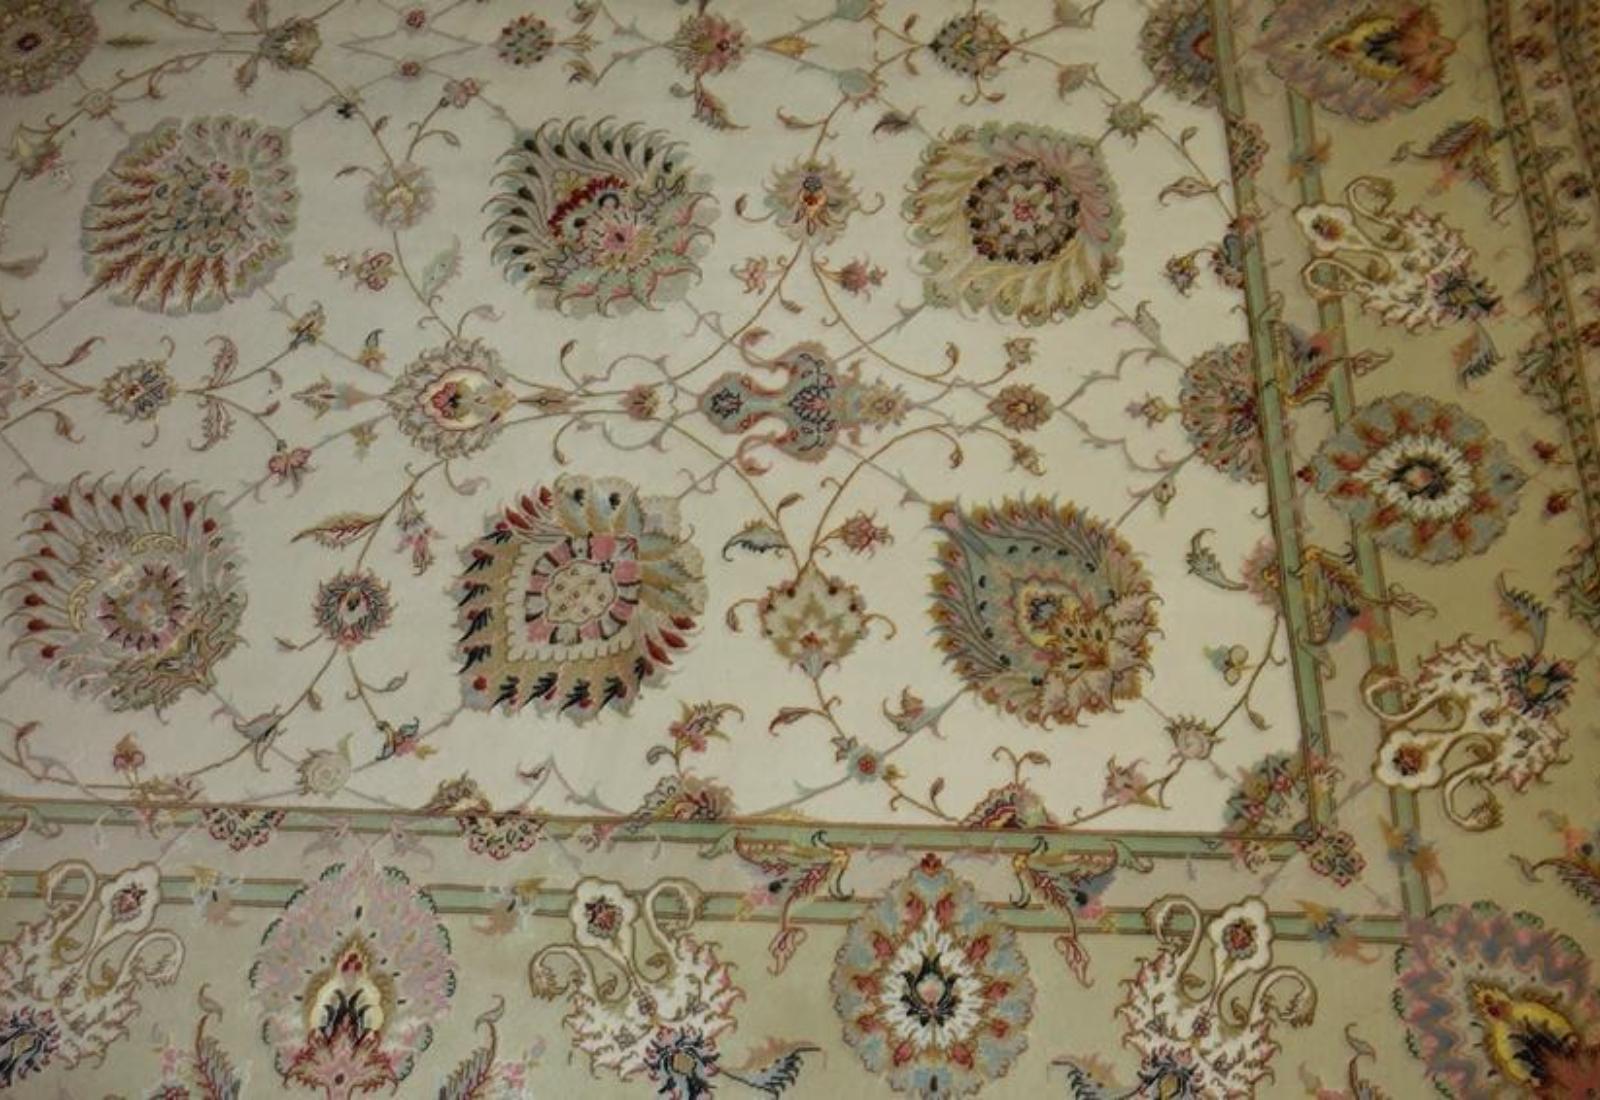 Very fine Persian Tabriz Silk & Wool - 11.8' 8.3' In Good Condition For Sale In Newmanstown, PA